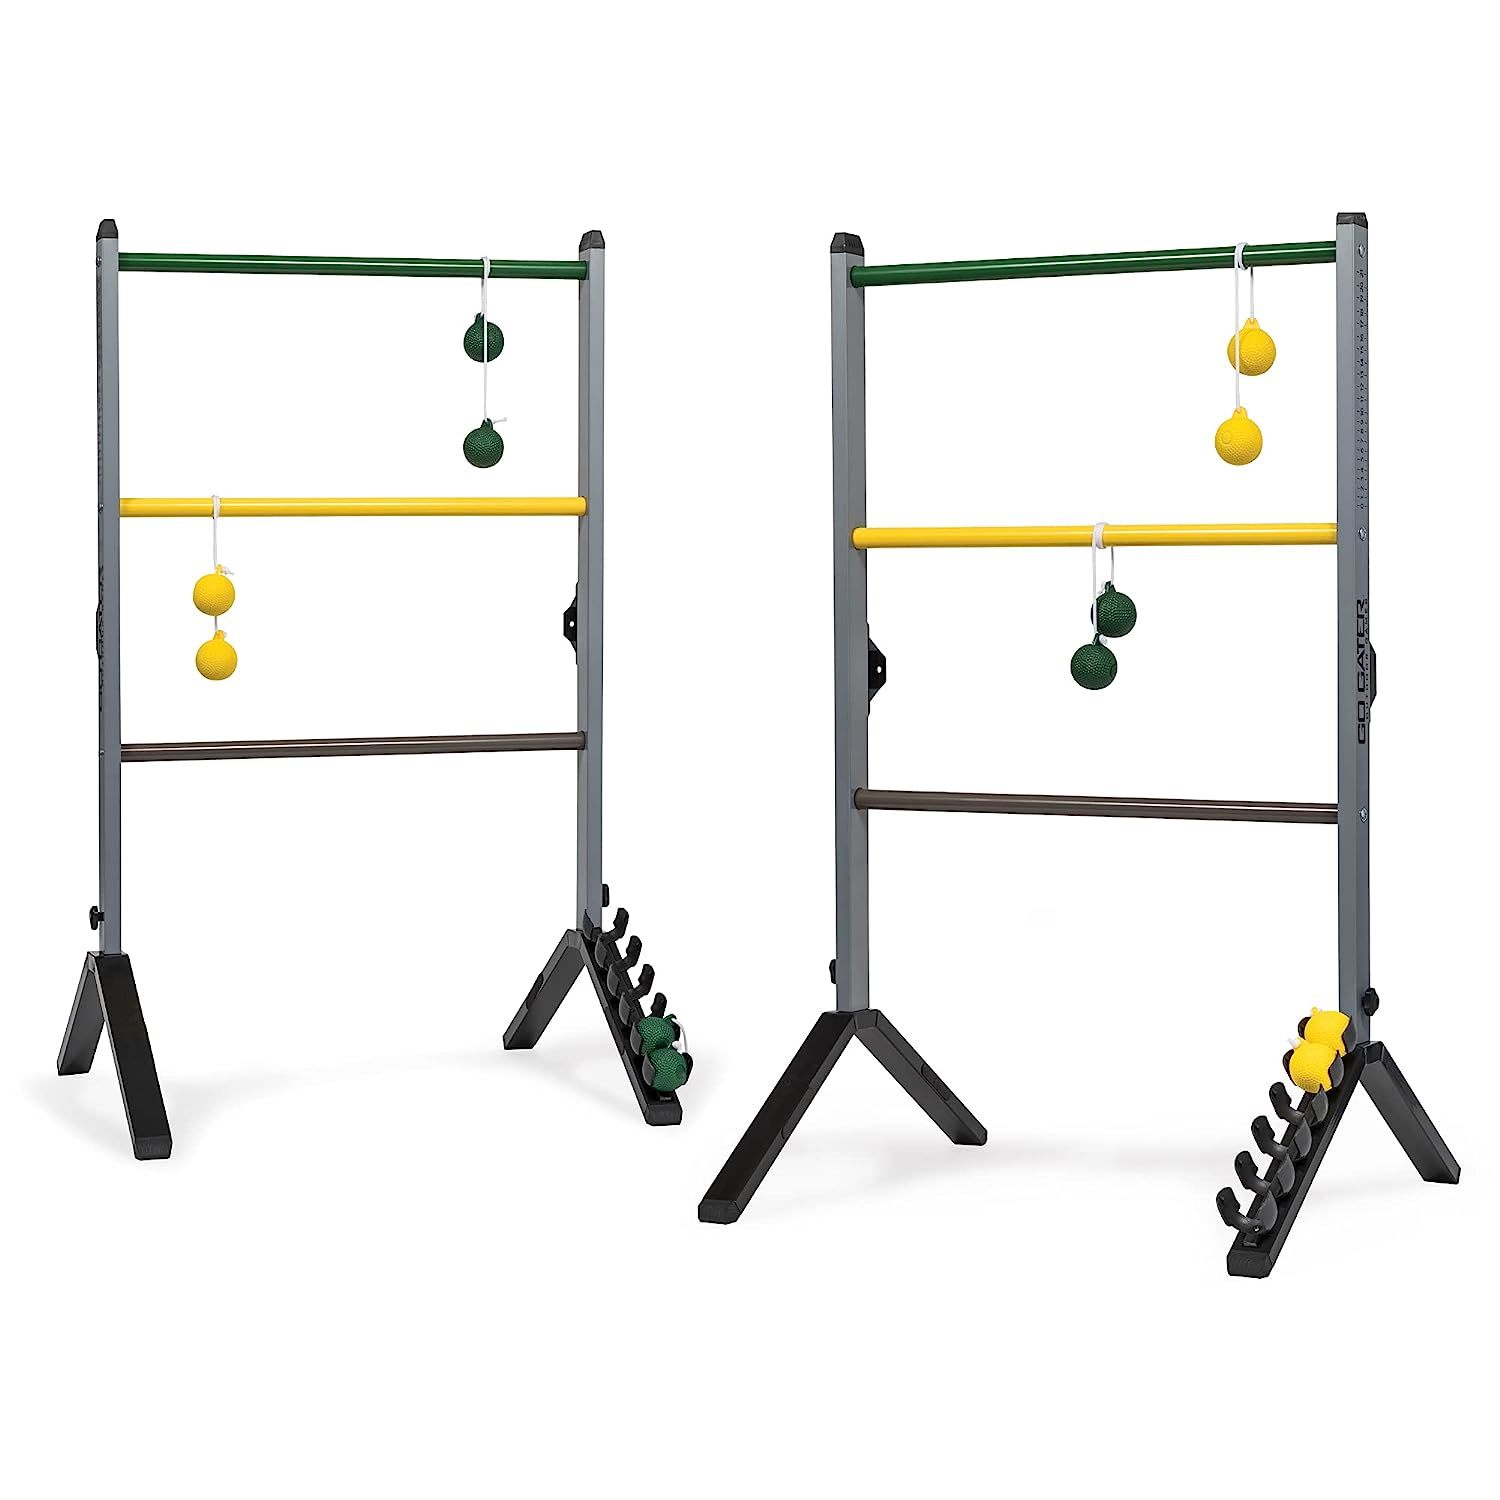 Go! Gater Premium Steel Ladderball Set, Features Sturdy Steel Material, Built-In - $83.99